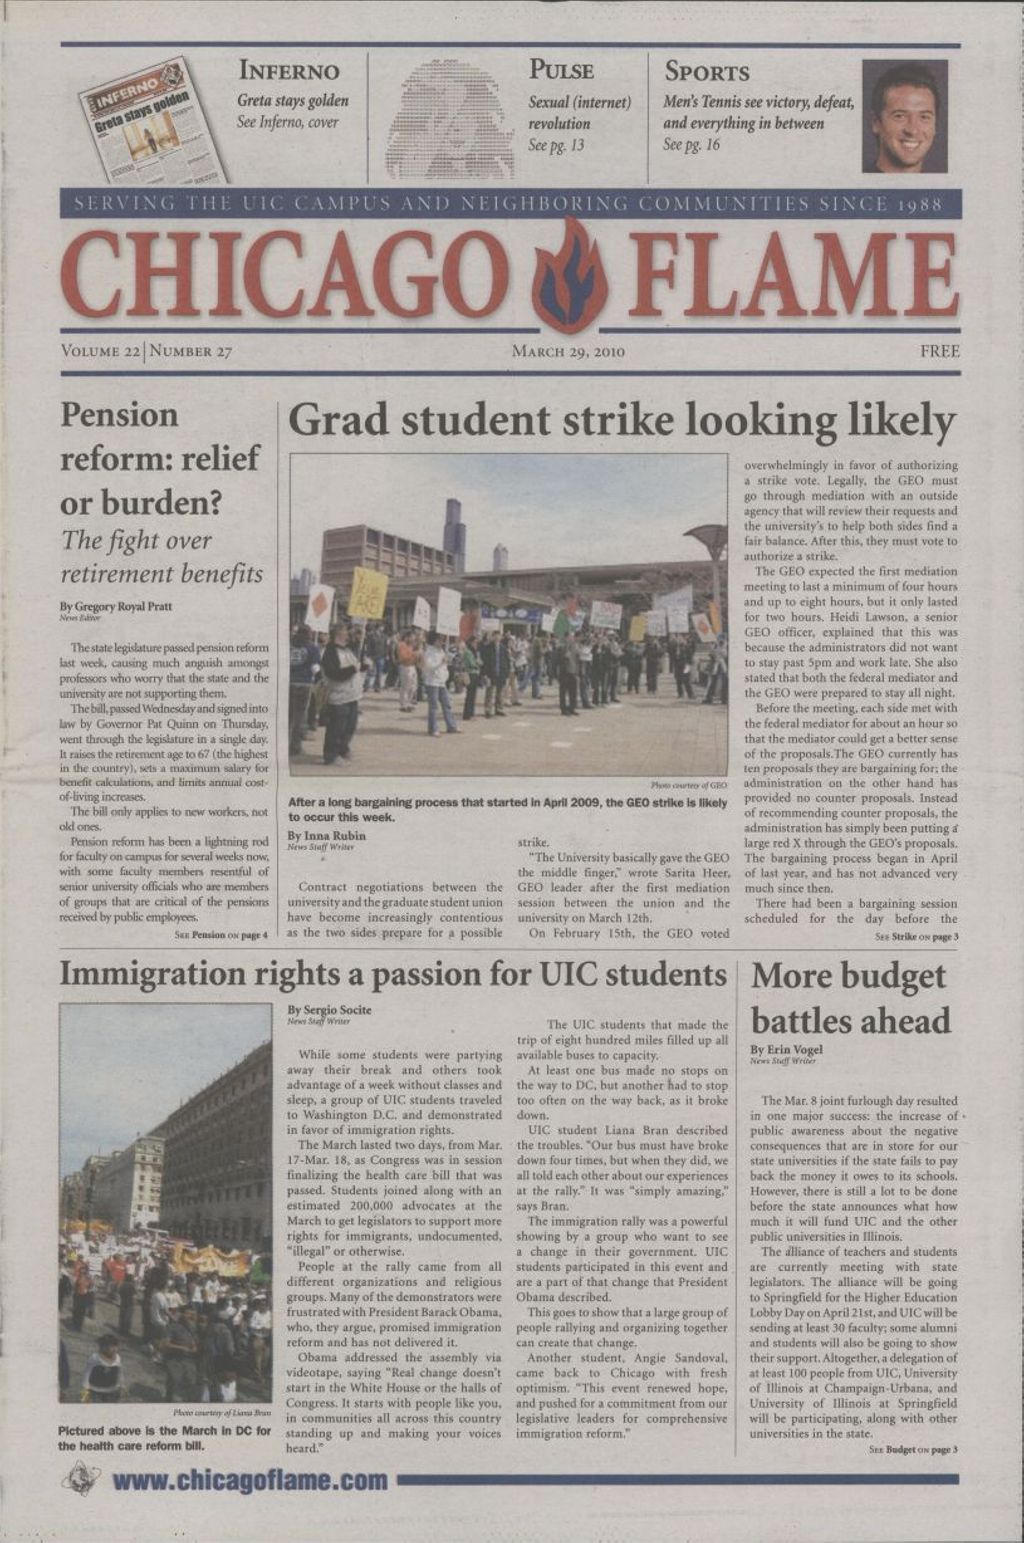 Miniature of Chicago Flame (March 29, 2010)